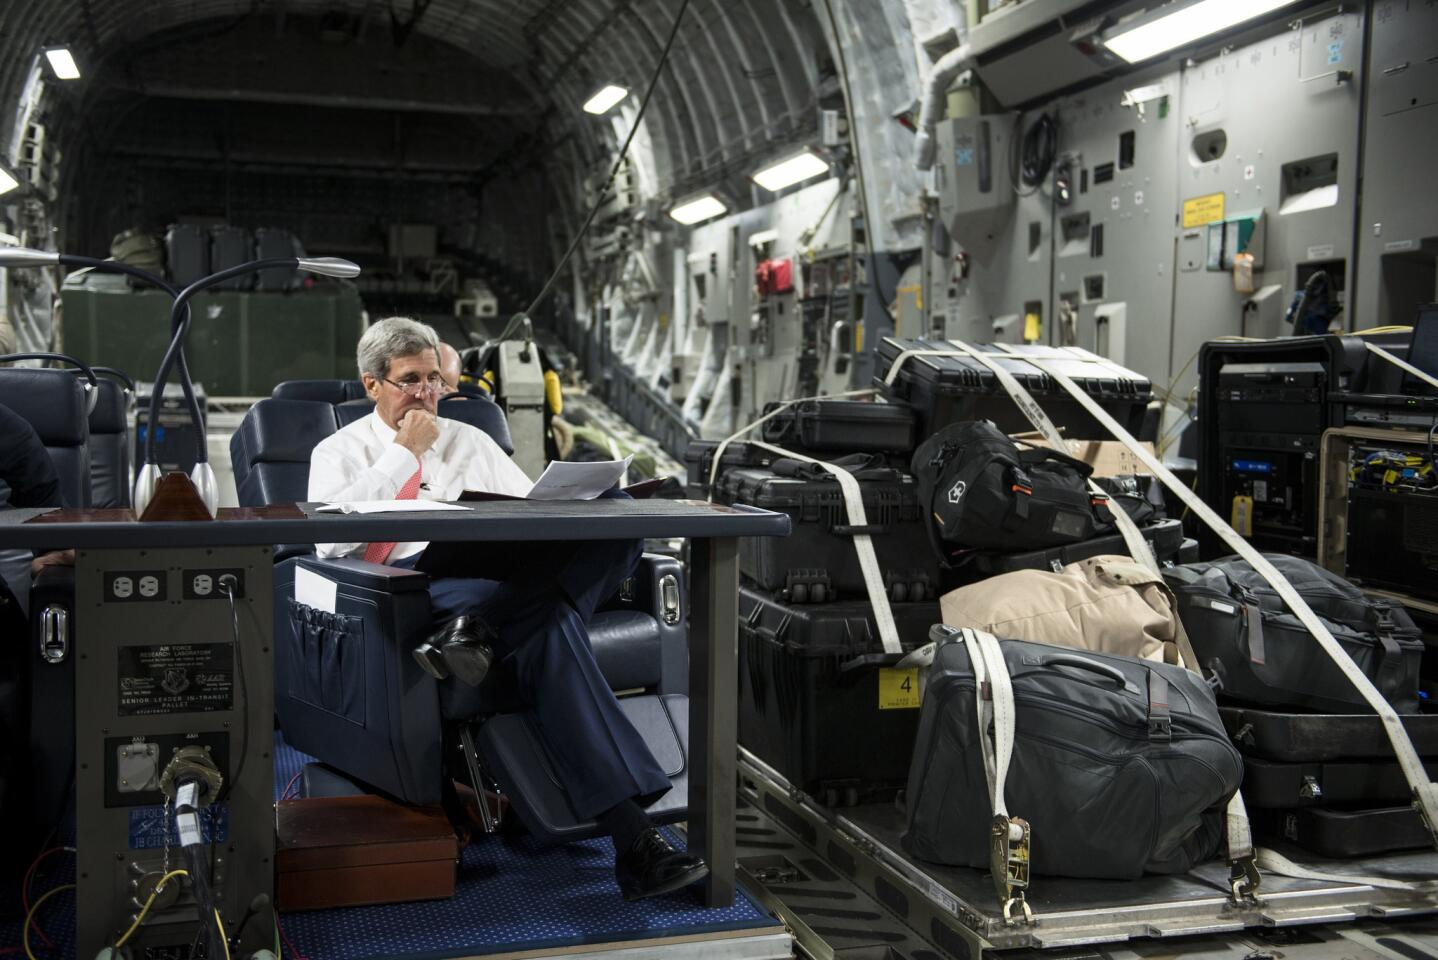 Secretary of State John Kerry looks over papers while flying from Jordan to Iraq on September 10.